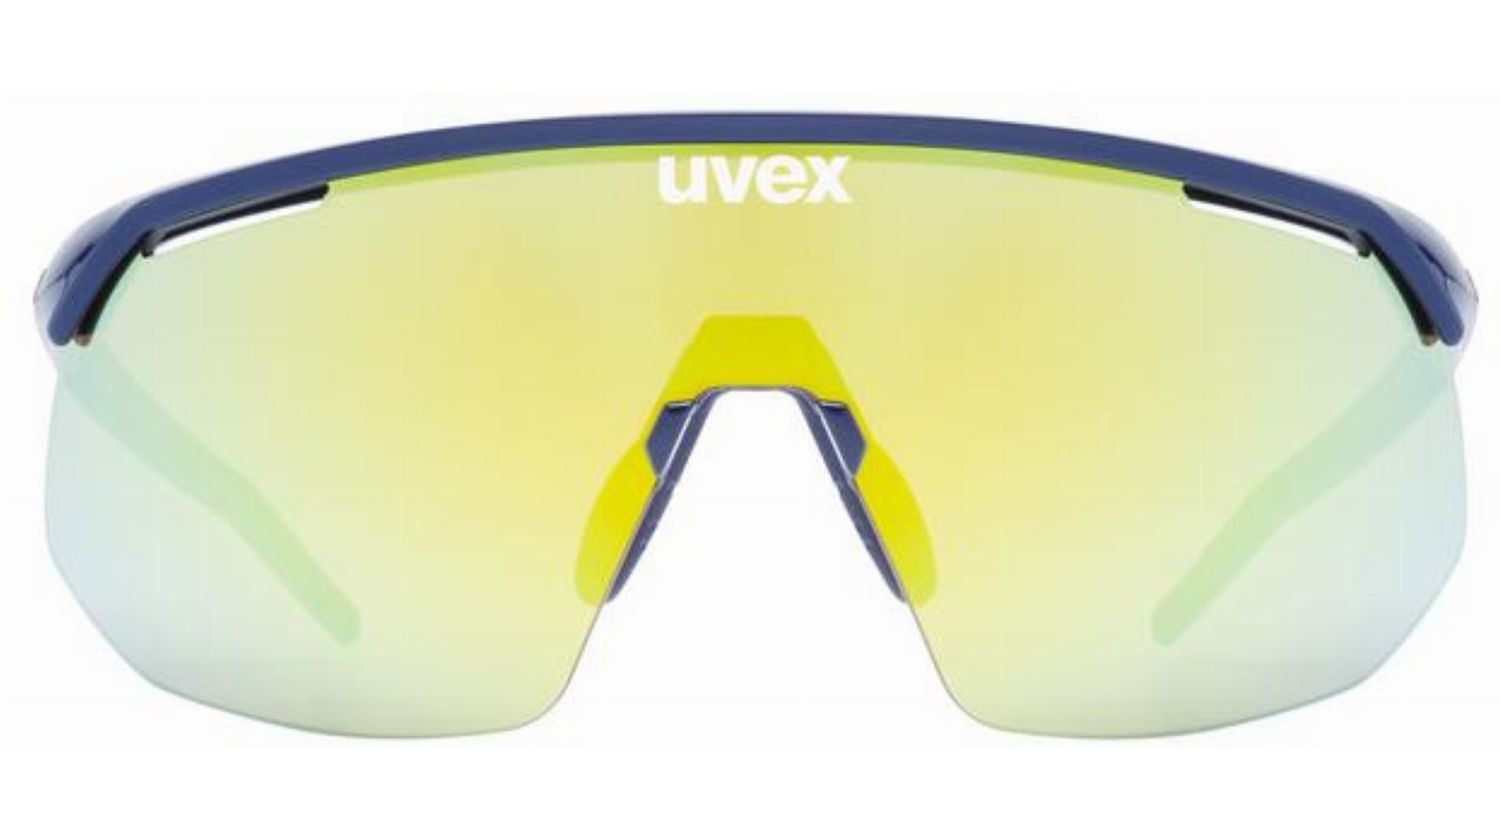 Uvex Pace One Sportbrille blue/mirror yellow